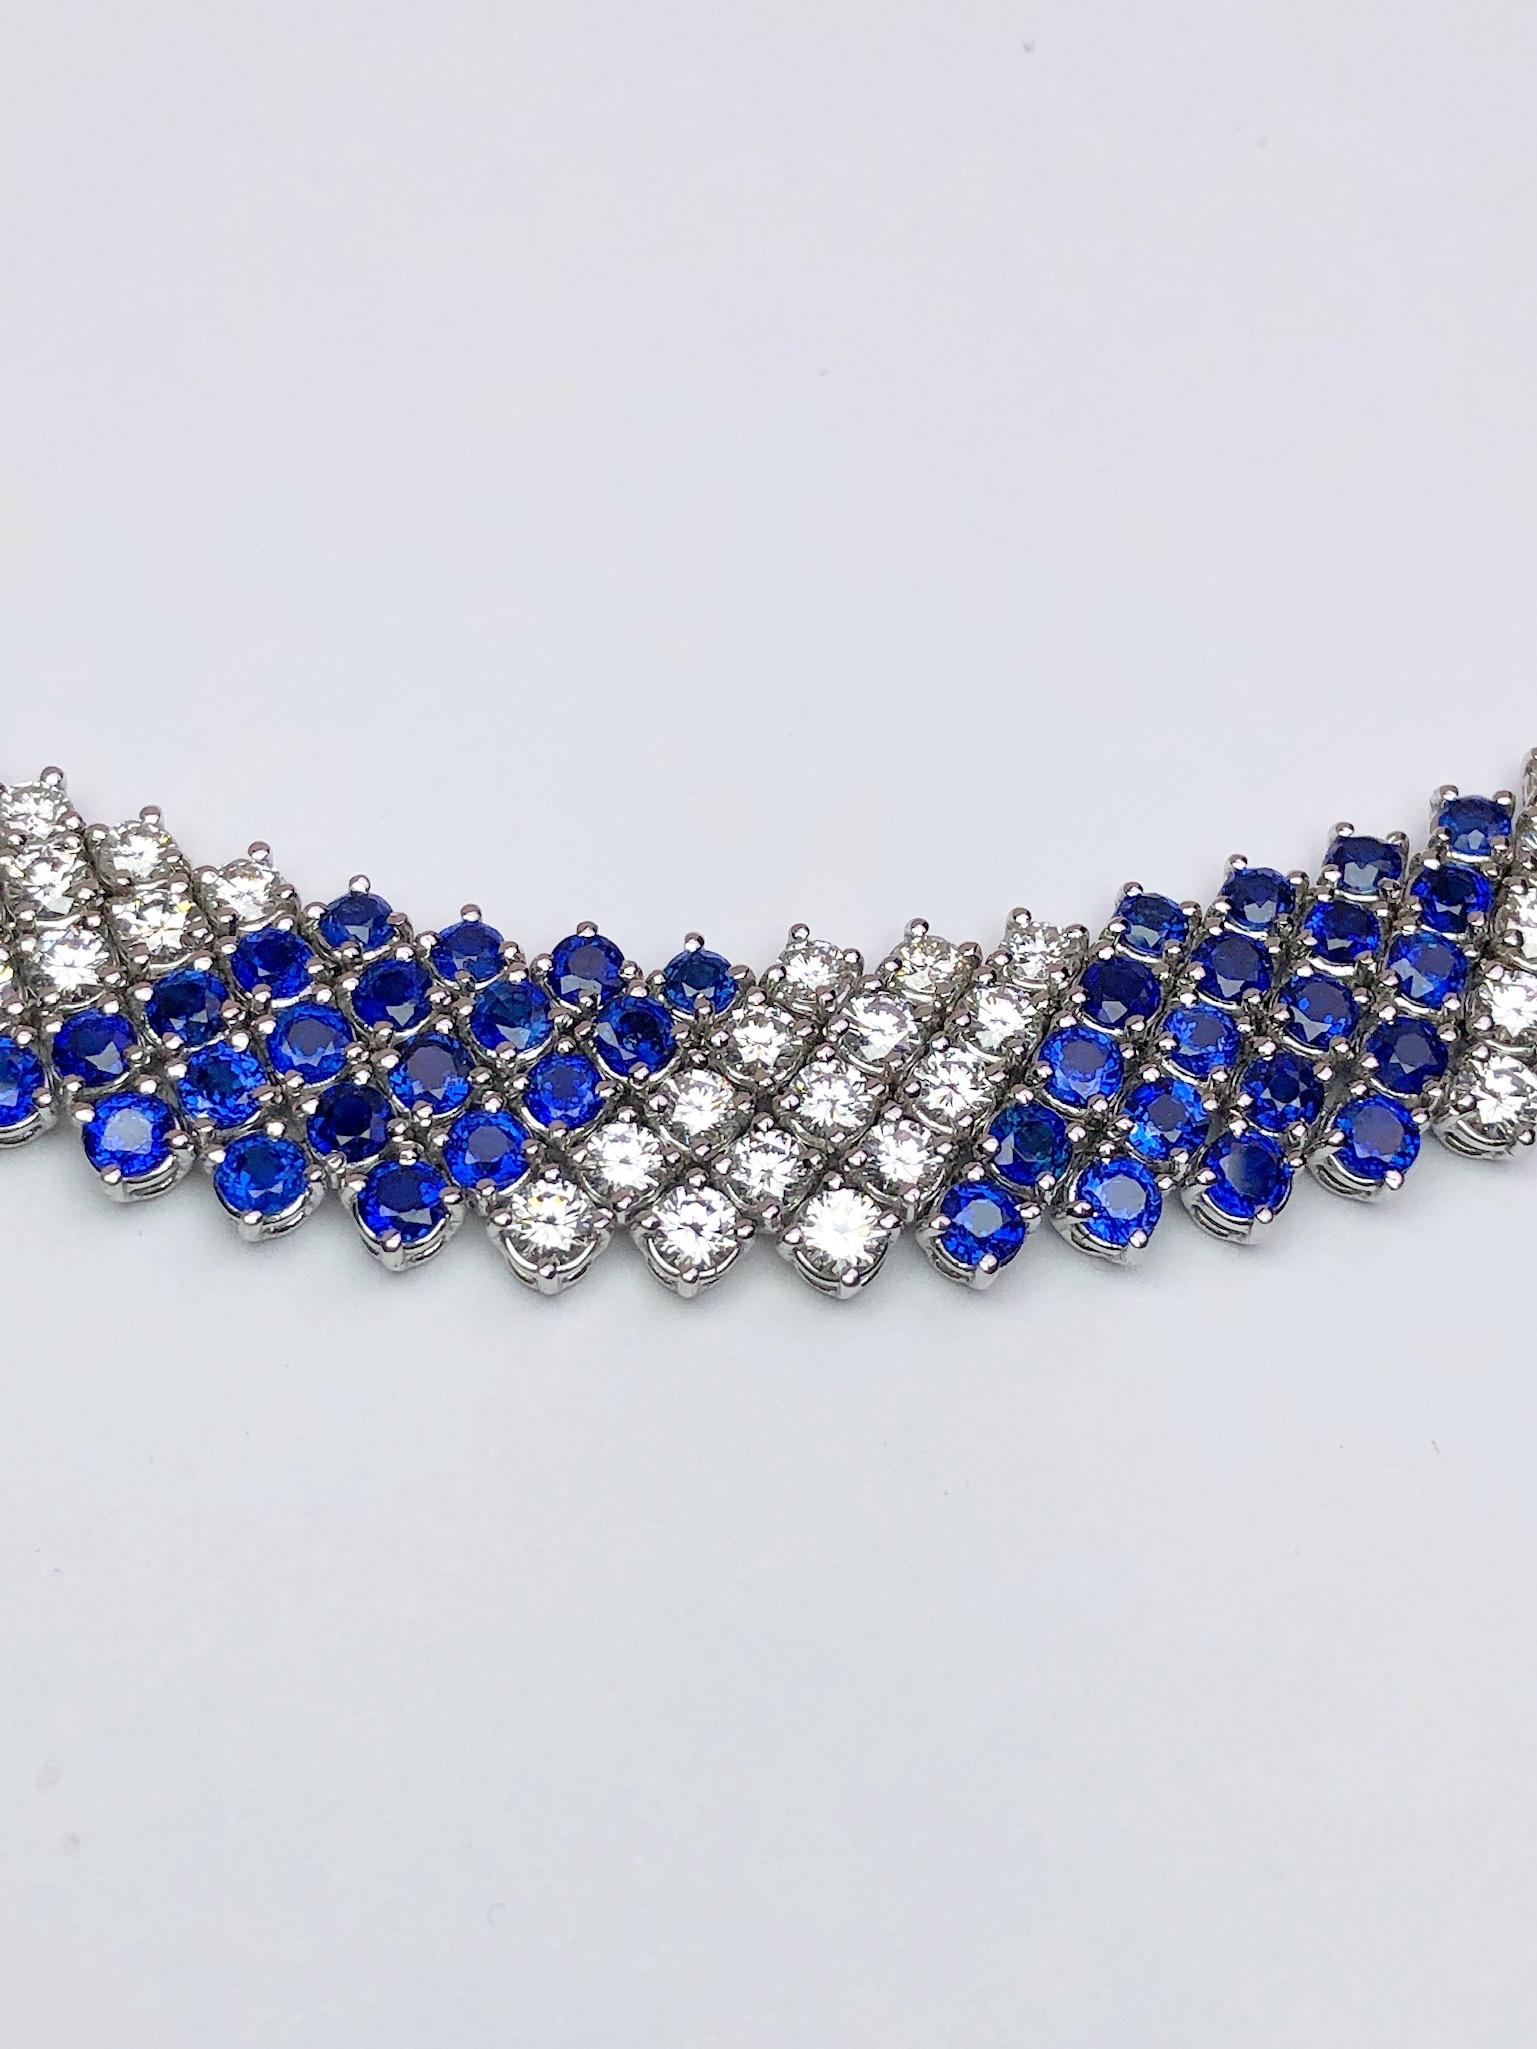 This lovely designed collar necklace by Crivelli is entirely set with 5 rows of round brilliant Diamonds and Blue Sapphires. The alternating stones and the flexibility of the setting will lay beautifully around the neck. The necklace measures 16